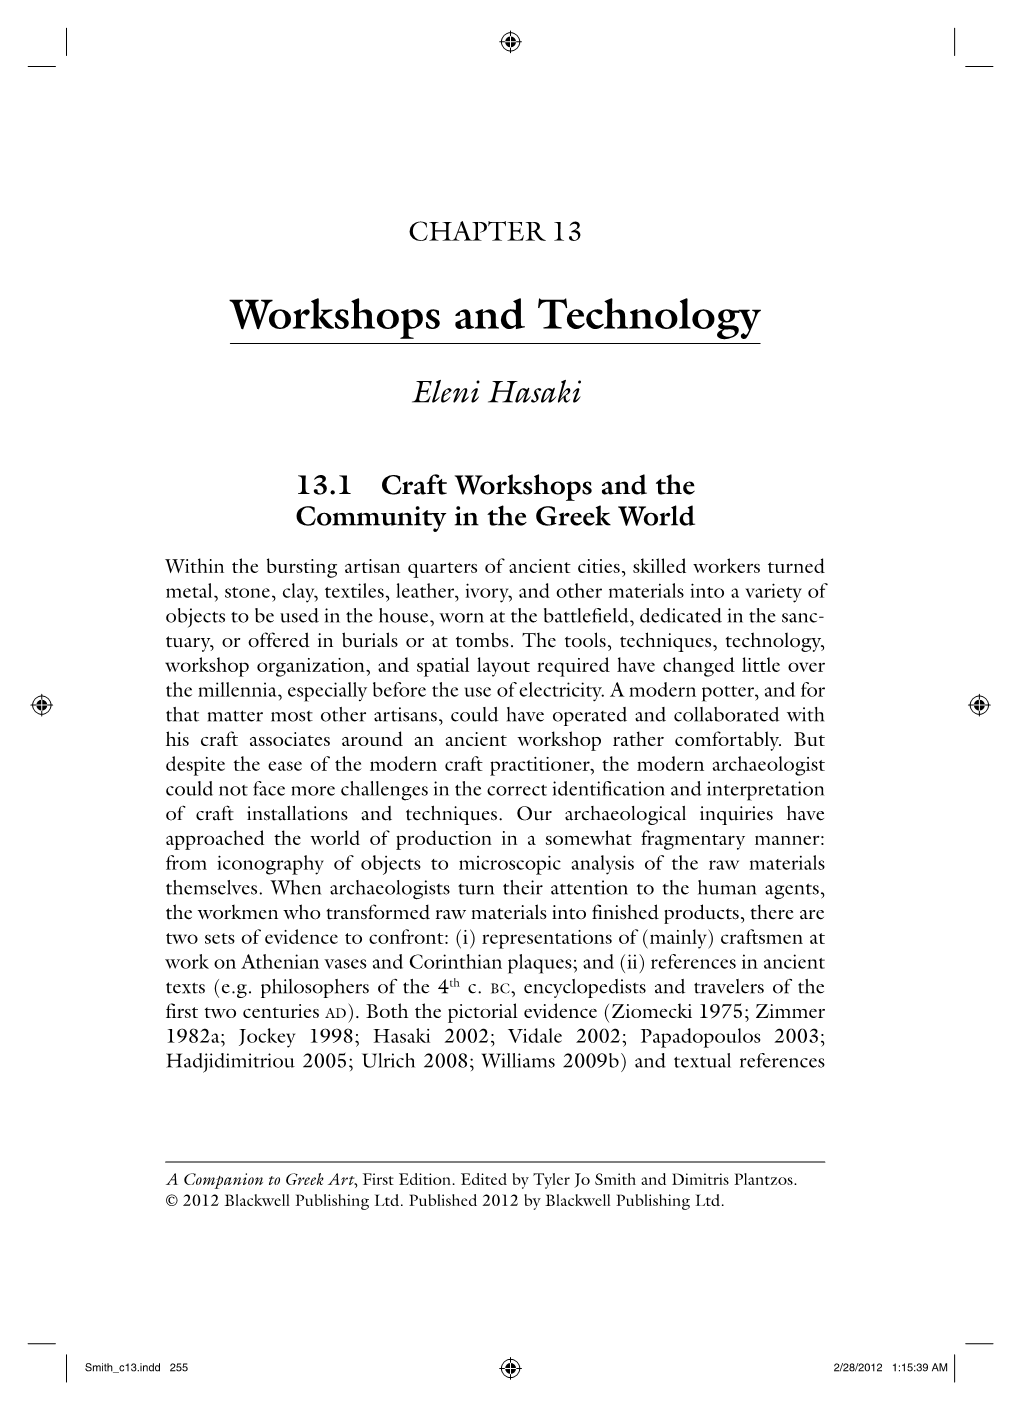 Workshops and Technology